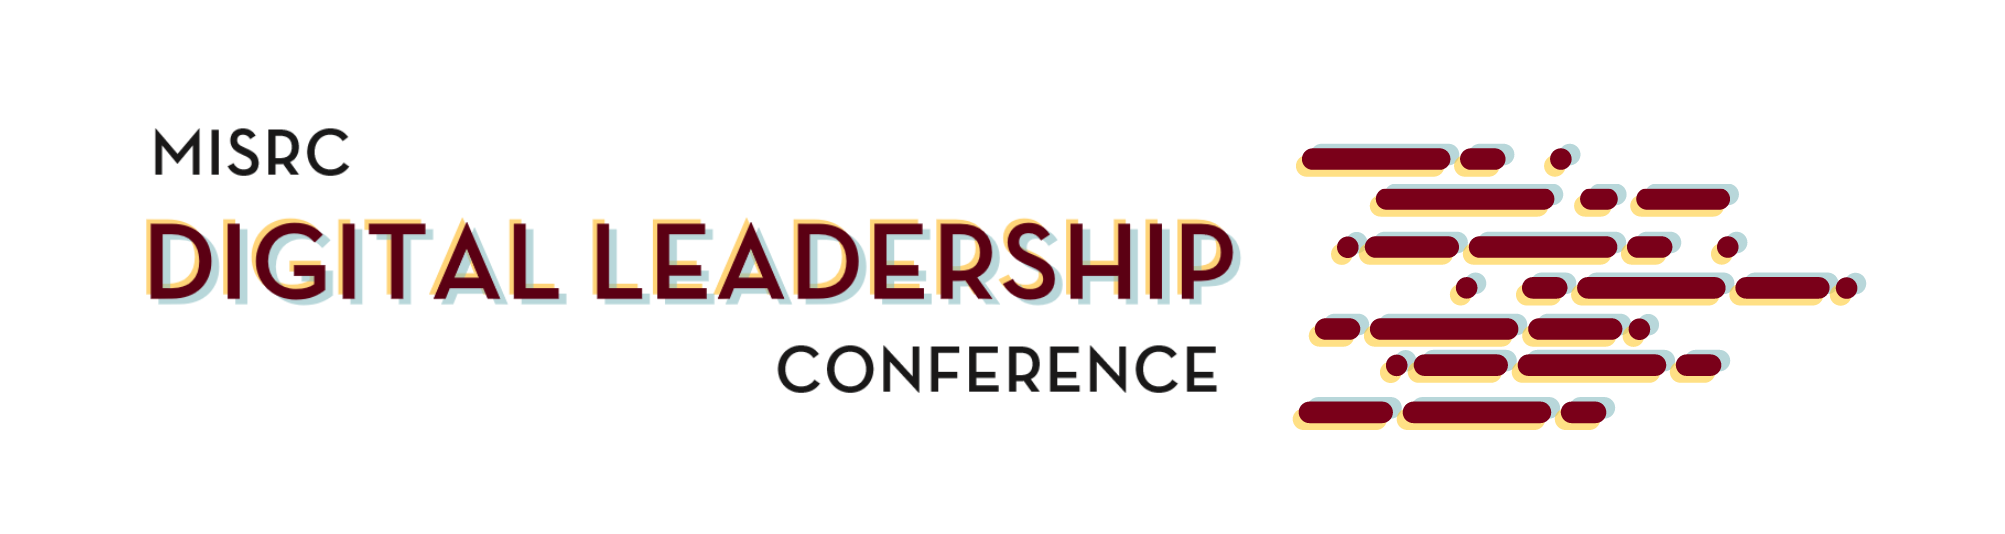 MIS Research Center Digital Leadership Conference banner